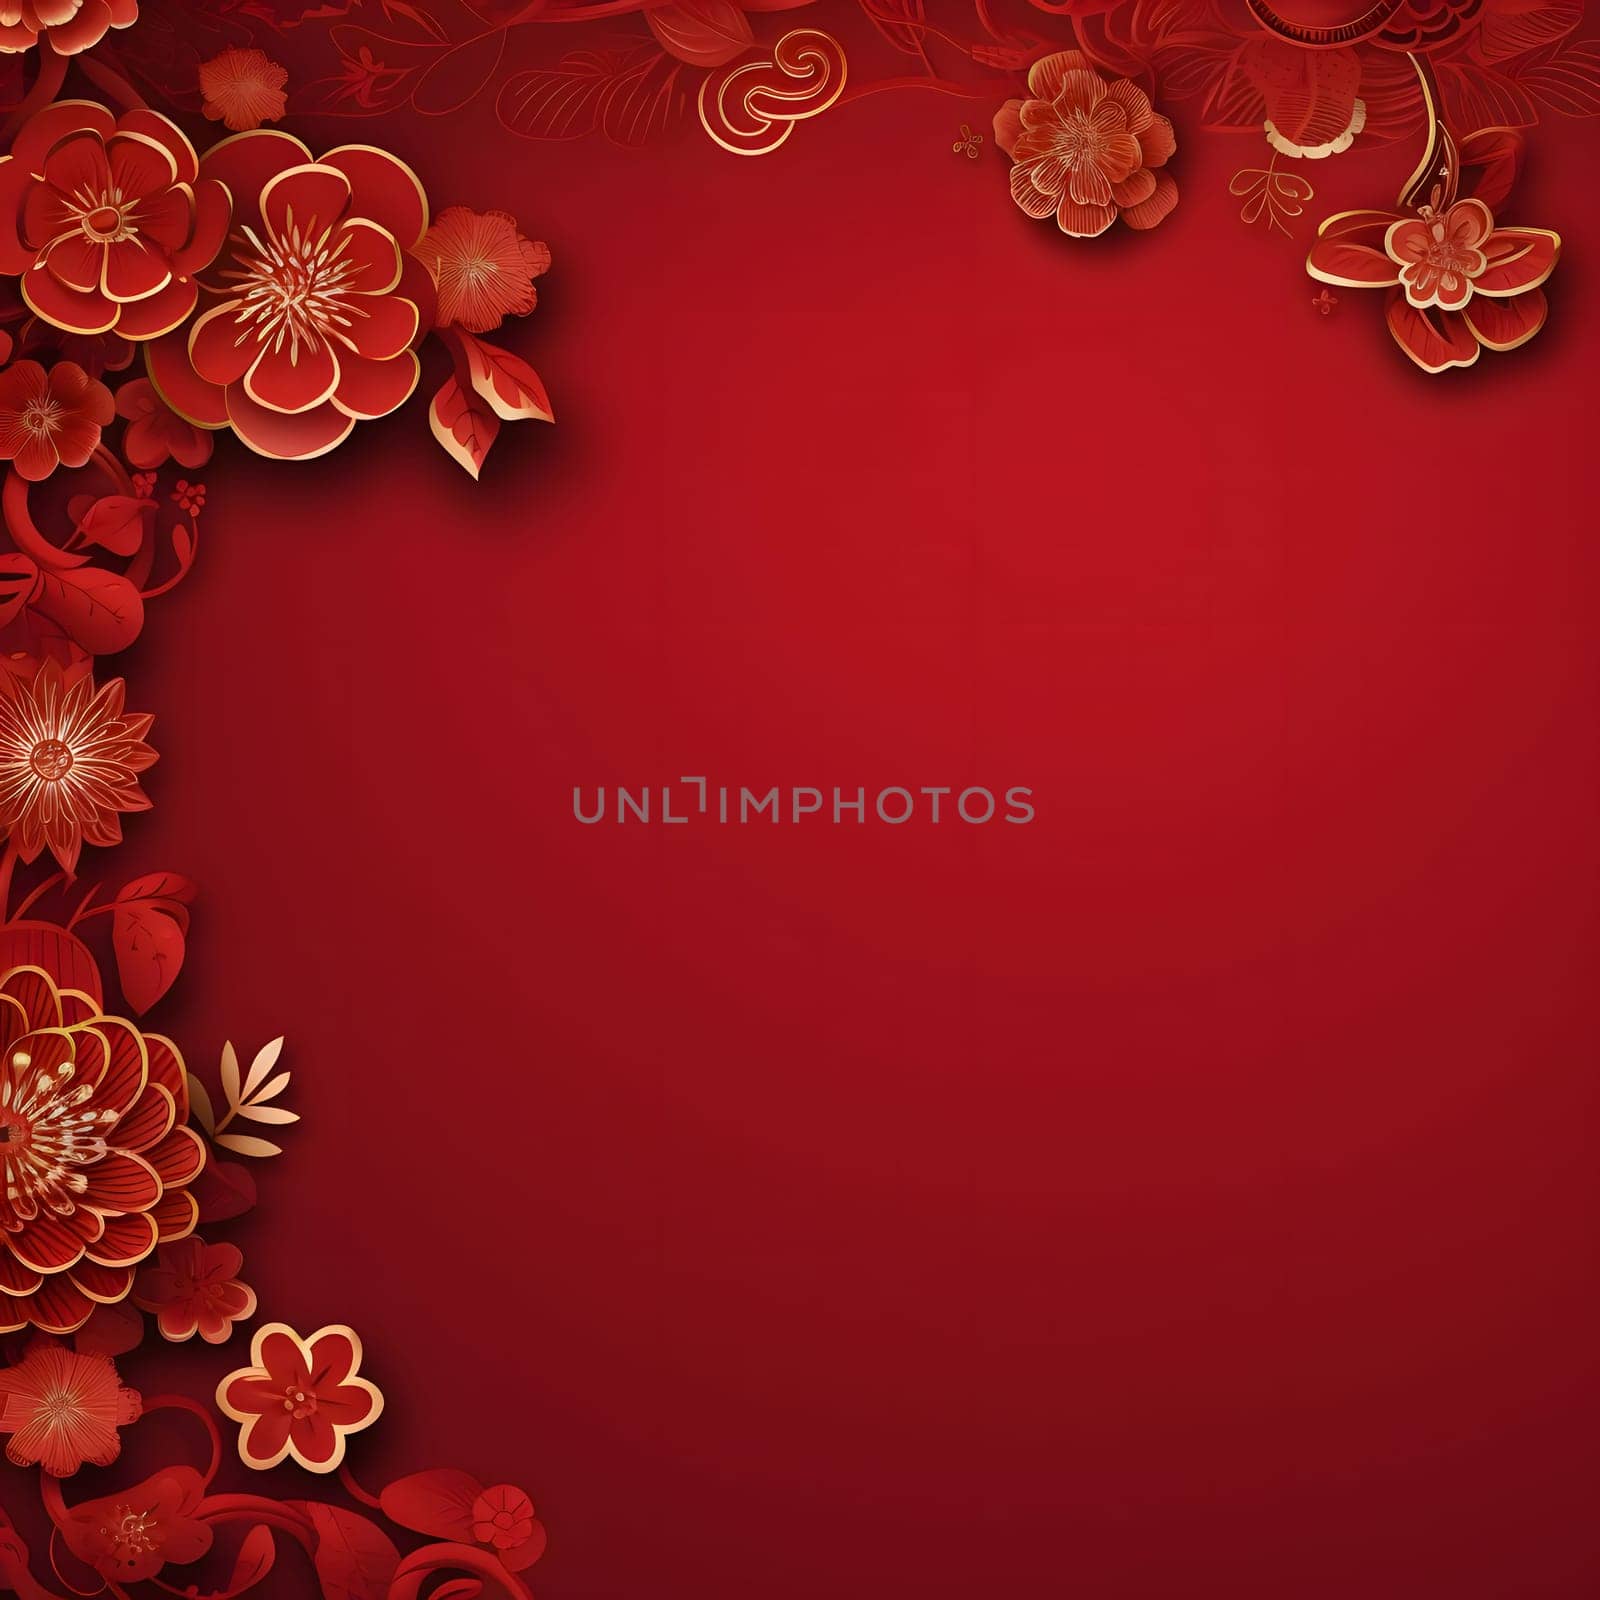 Red blank with space for your own content on the side of the decoration with red flowers lanterns Chinese background. A time of celebration and resolutions.